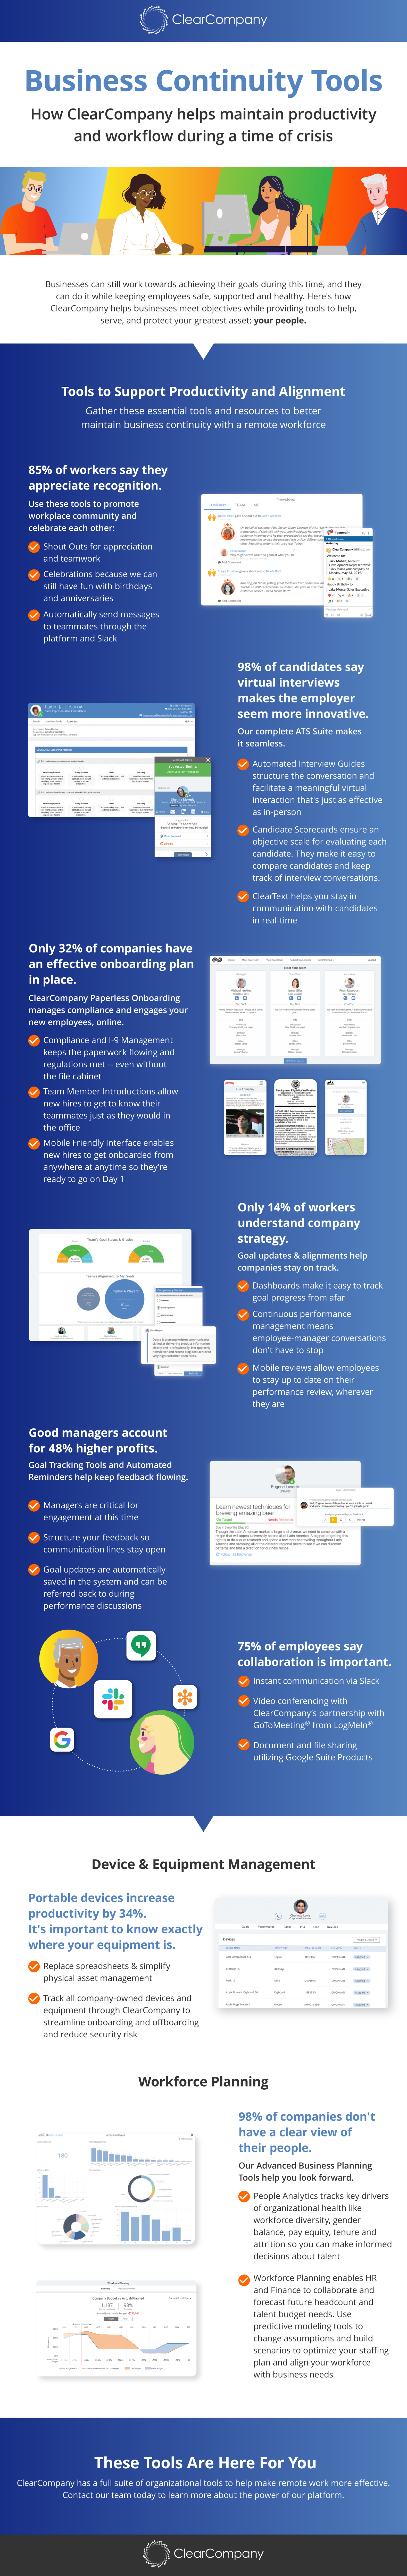 Business-Cont-Infographic-Internal@2x